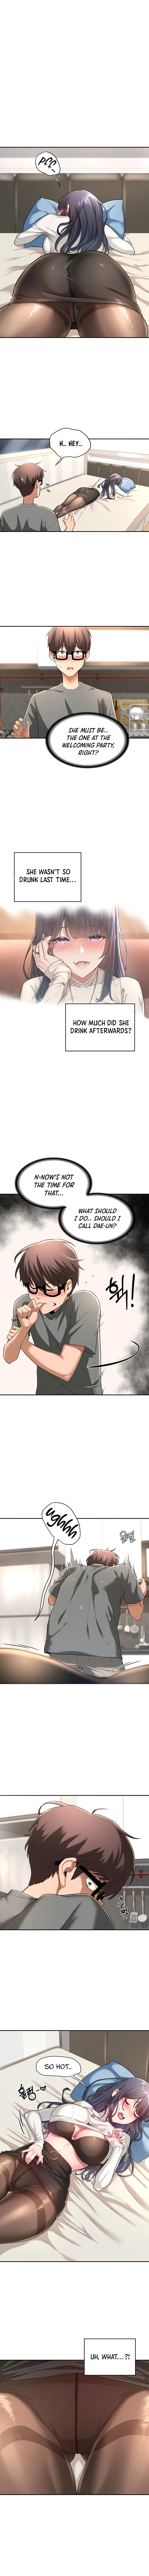 Panel Image 1 for chapter 2 of manhwa Sex Study Group on read.oppai.stream